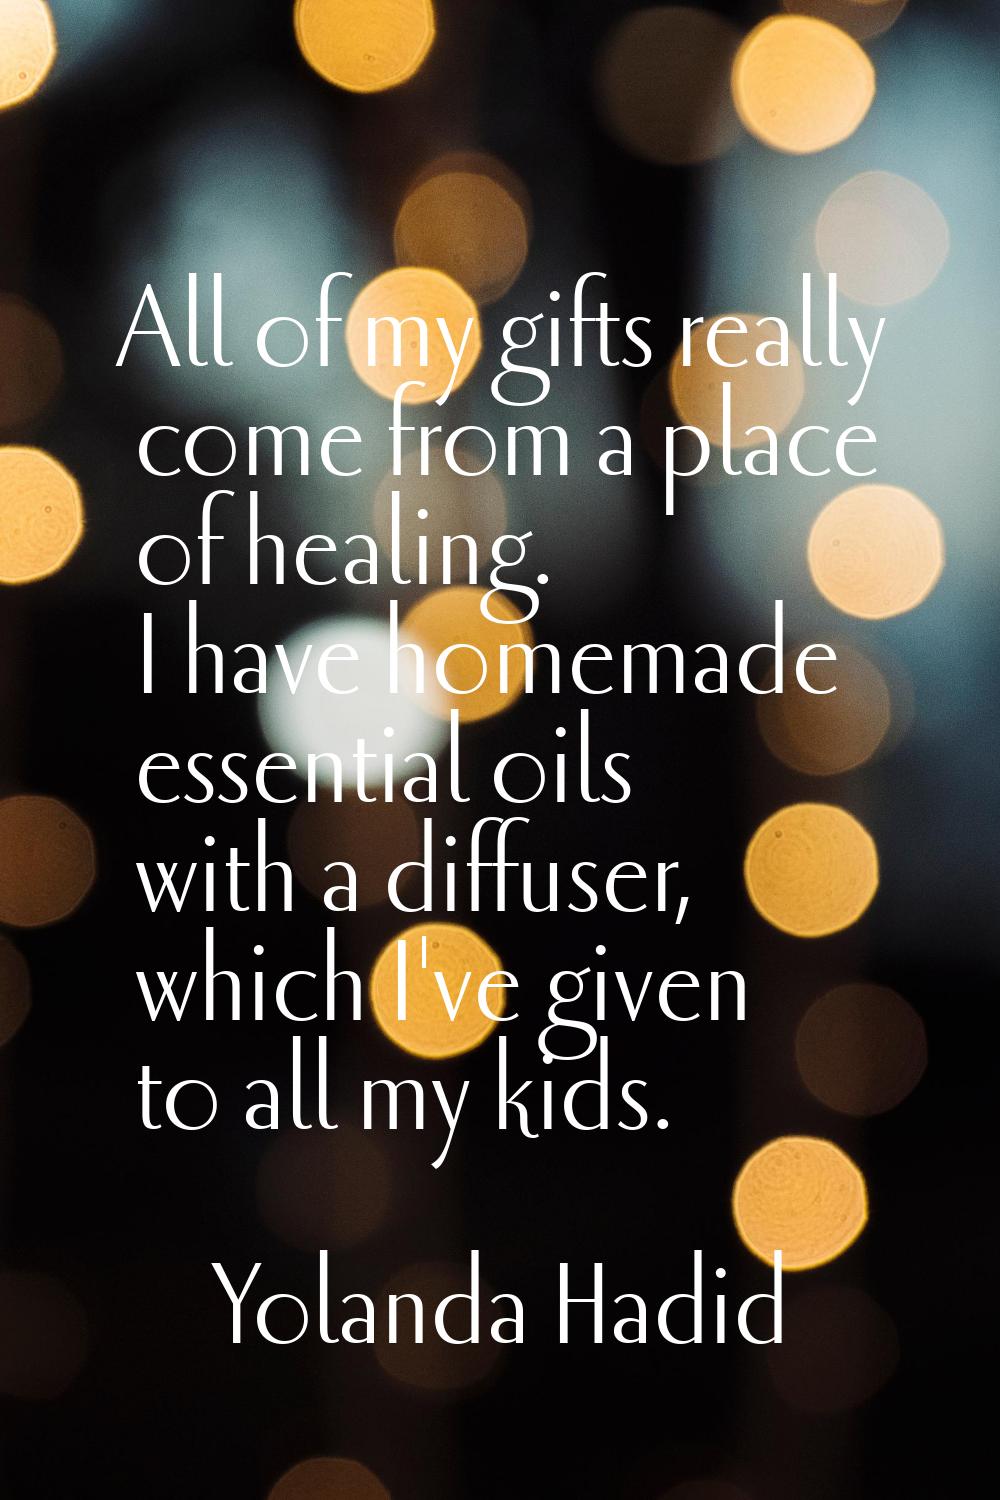 All of my gifts really come from a place of healing. I have homemade essential oils with a diffuser